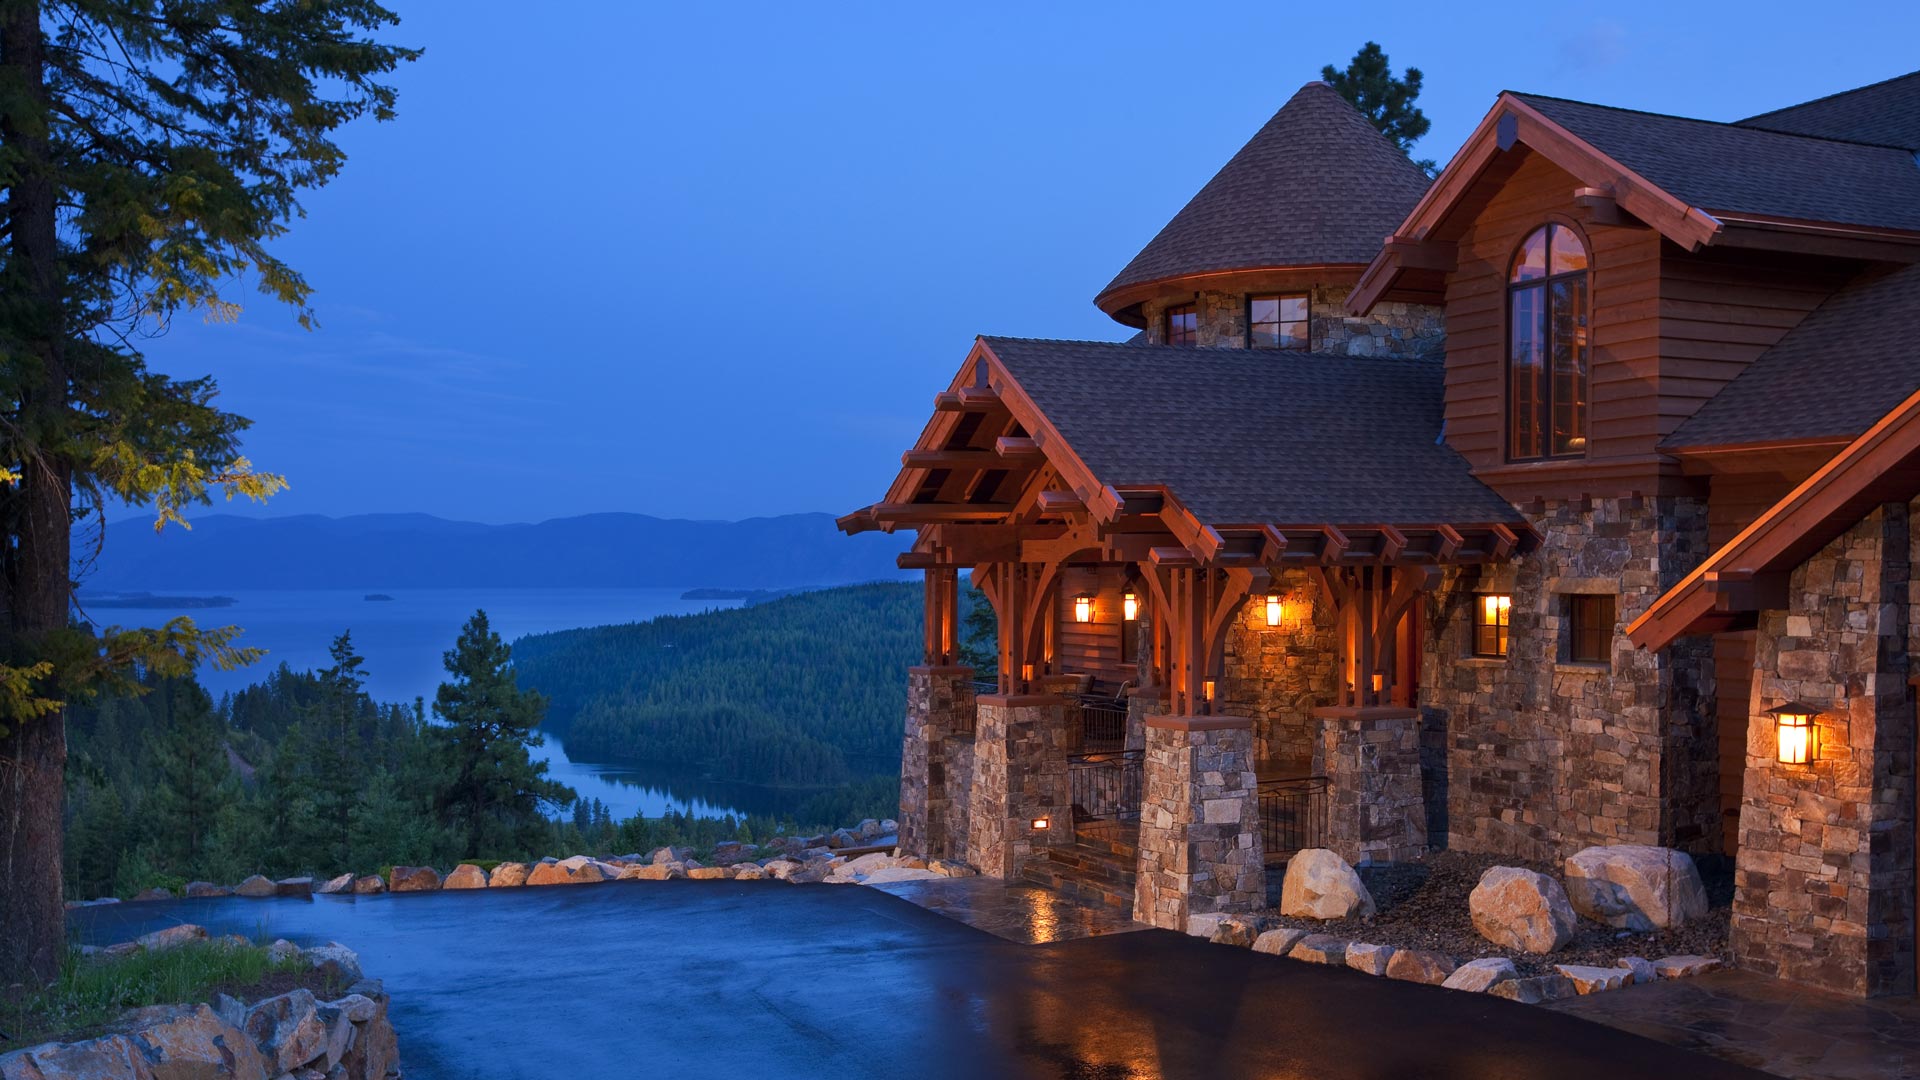 House Overlooking the Lake HD Wallpaper | Background Image  